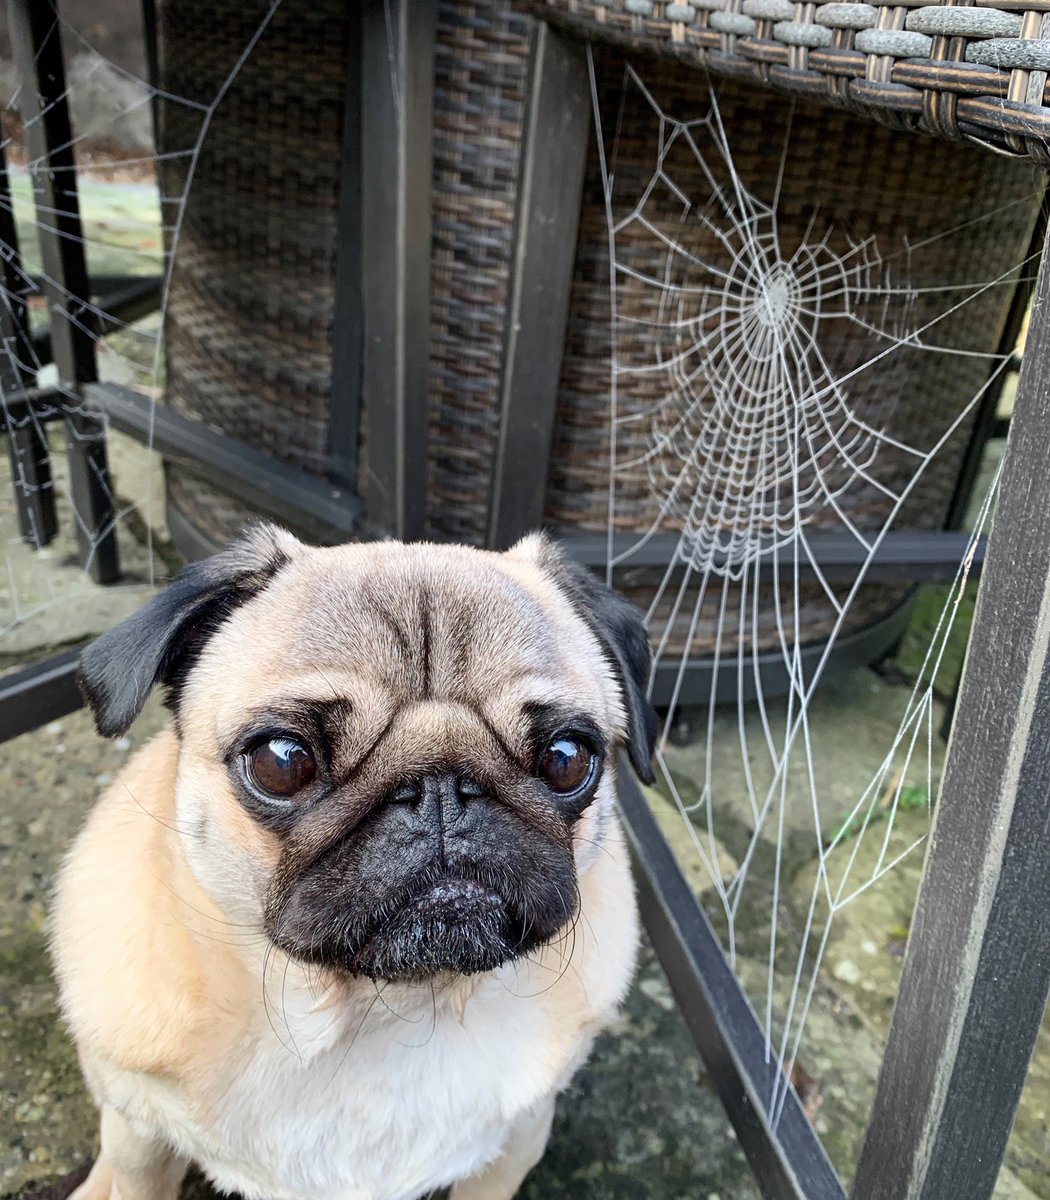 When you’re having an identity crisis... am I Spiderpug now? 🤷‍♂️🕸 #puglife